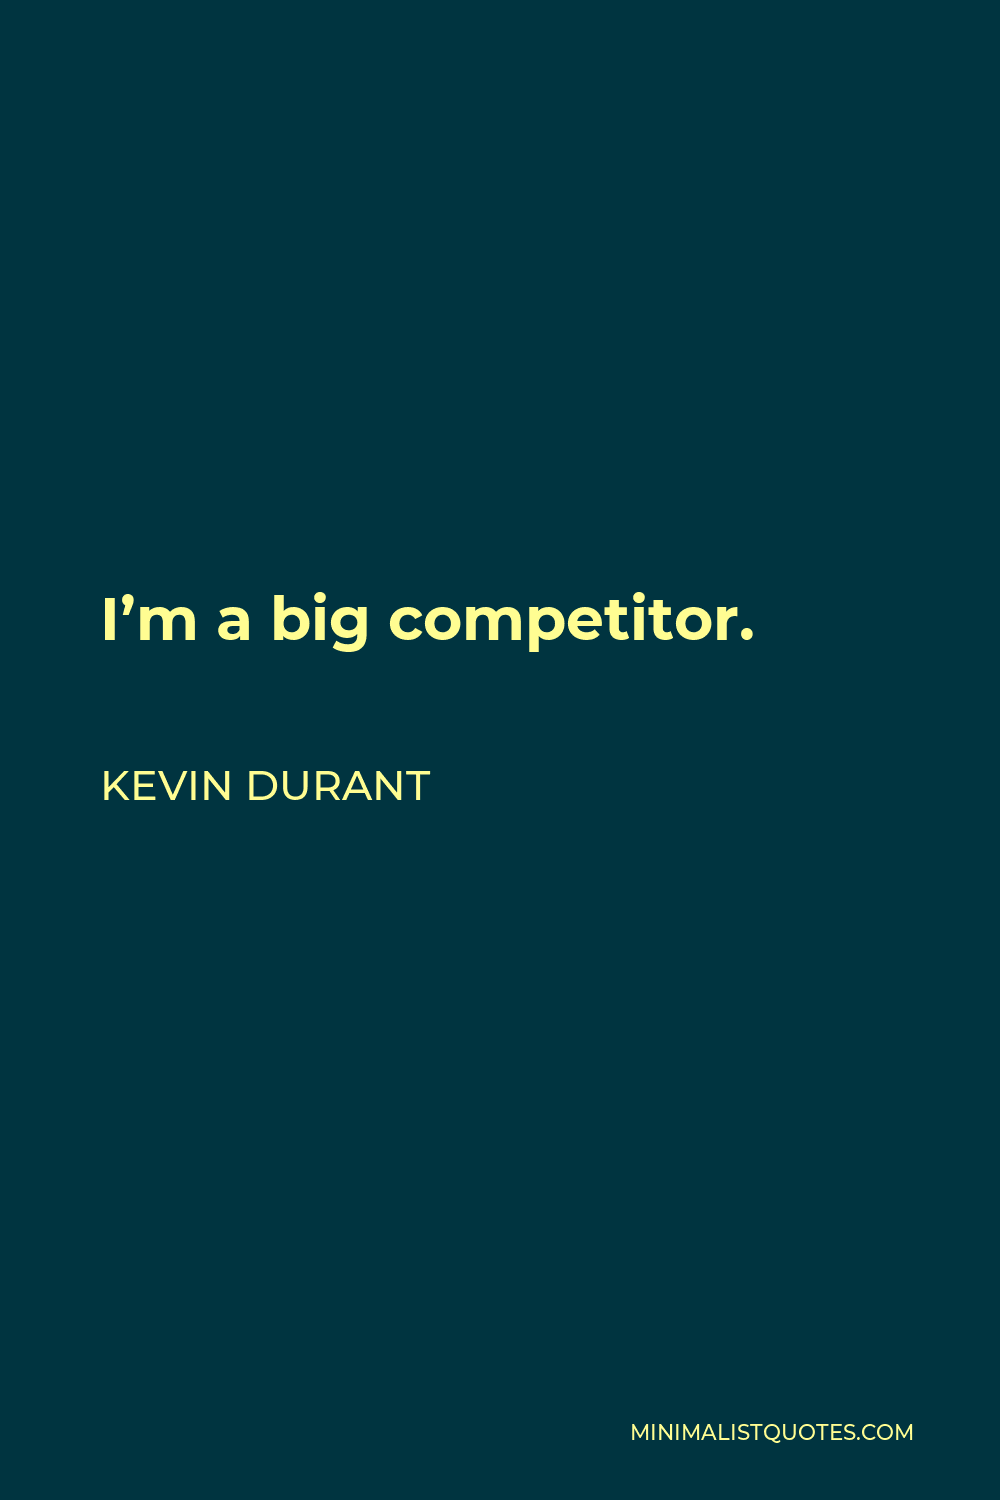 Kevin Durant Quote - I’m a big competitor.